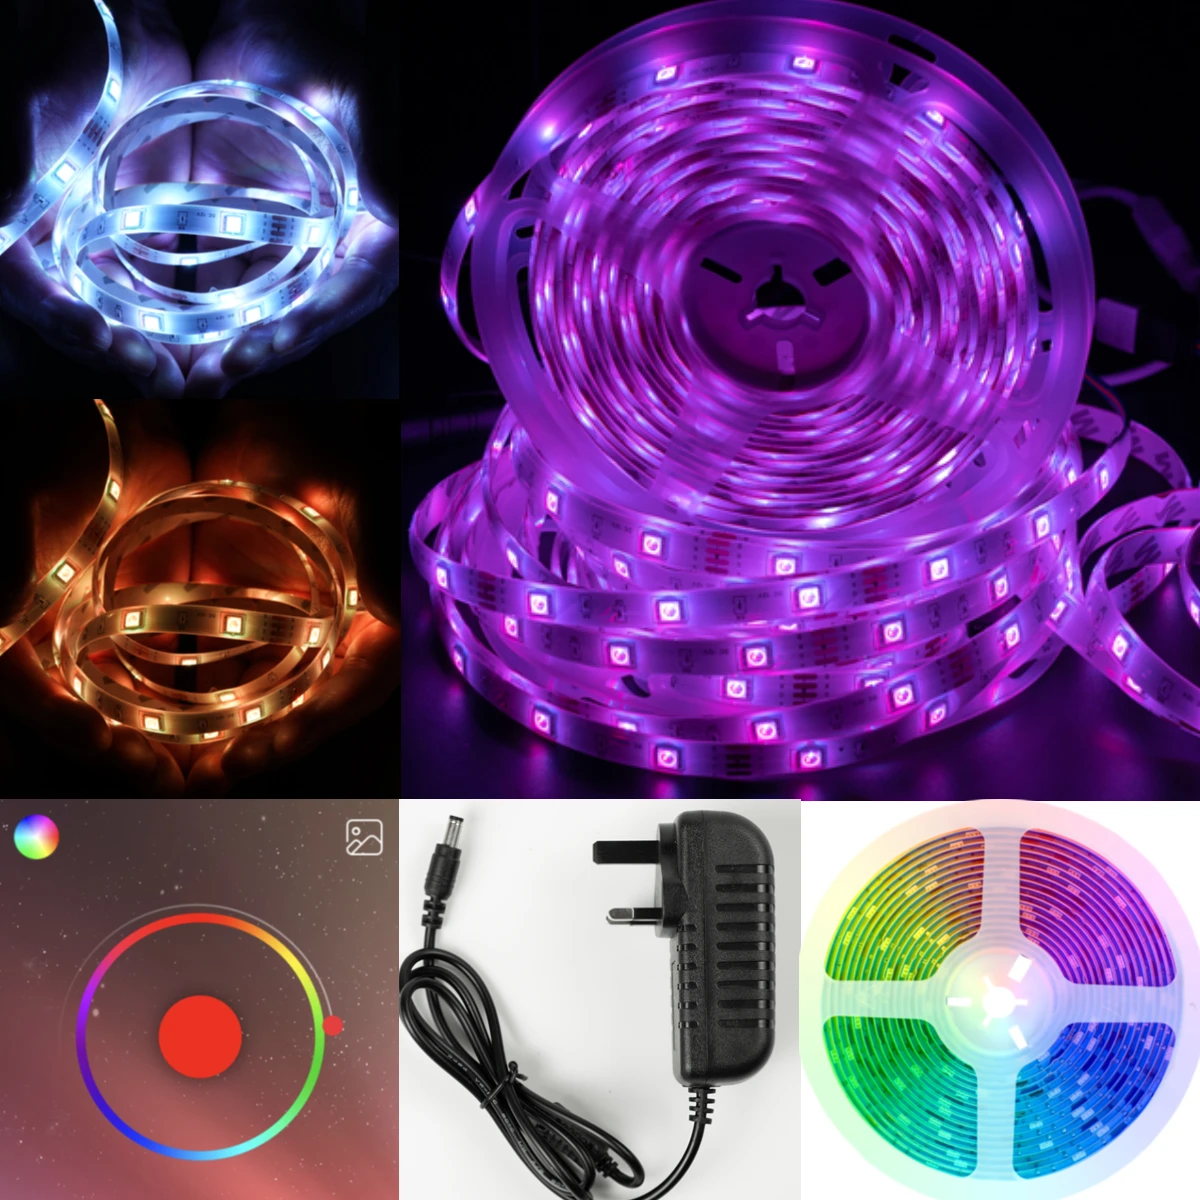 

LED Strip Lights RGB 5050 SMD 2835 DIY Waterproof Lamp Flexible Tape Diode Bluetooth luces led 16.4ft DC 12V For Home